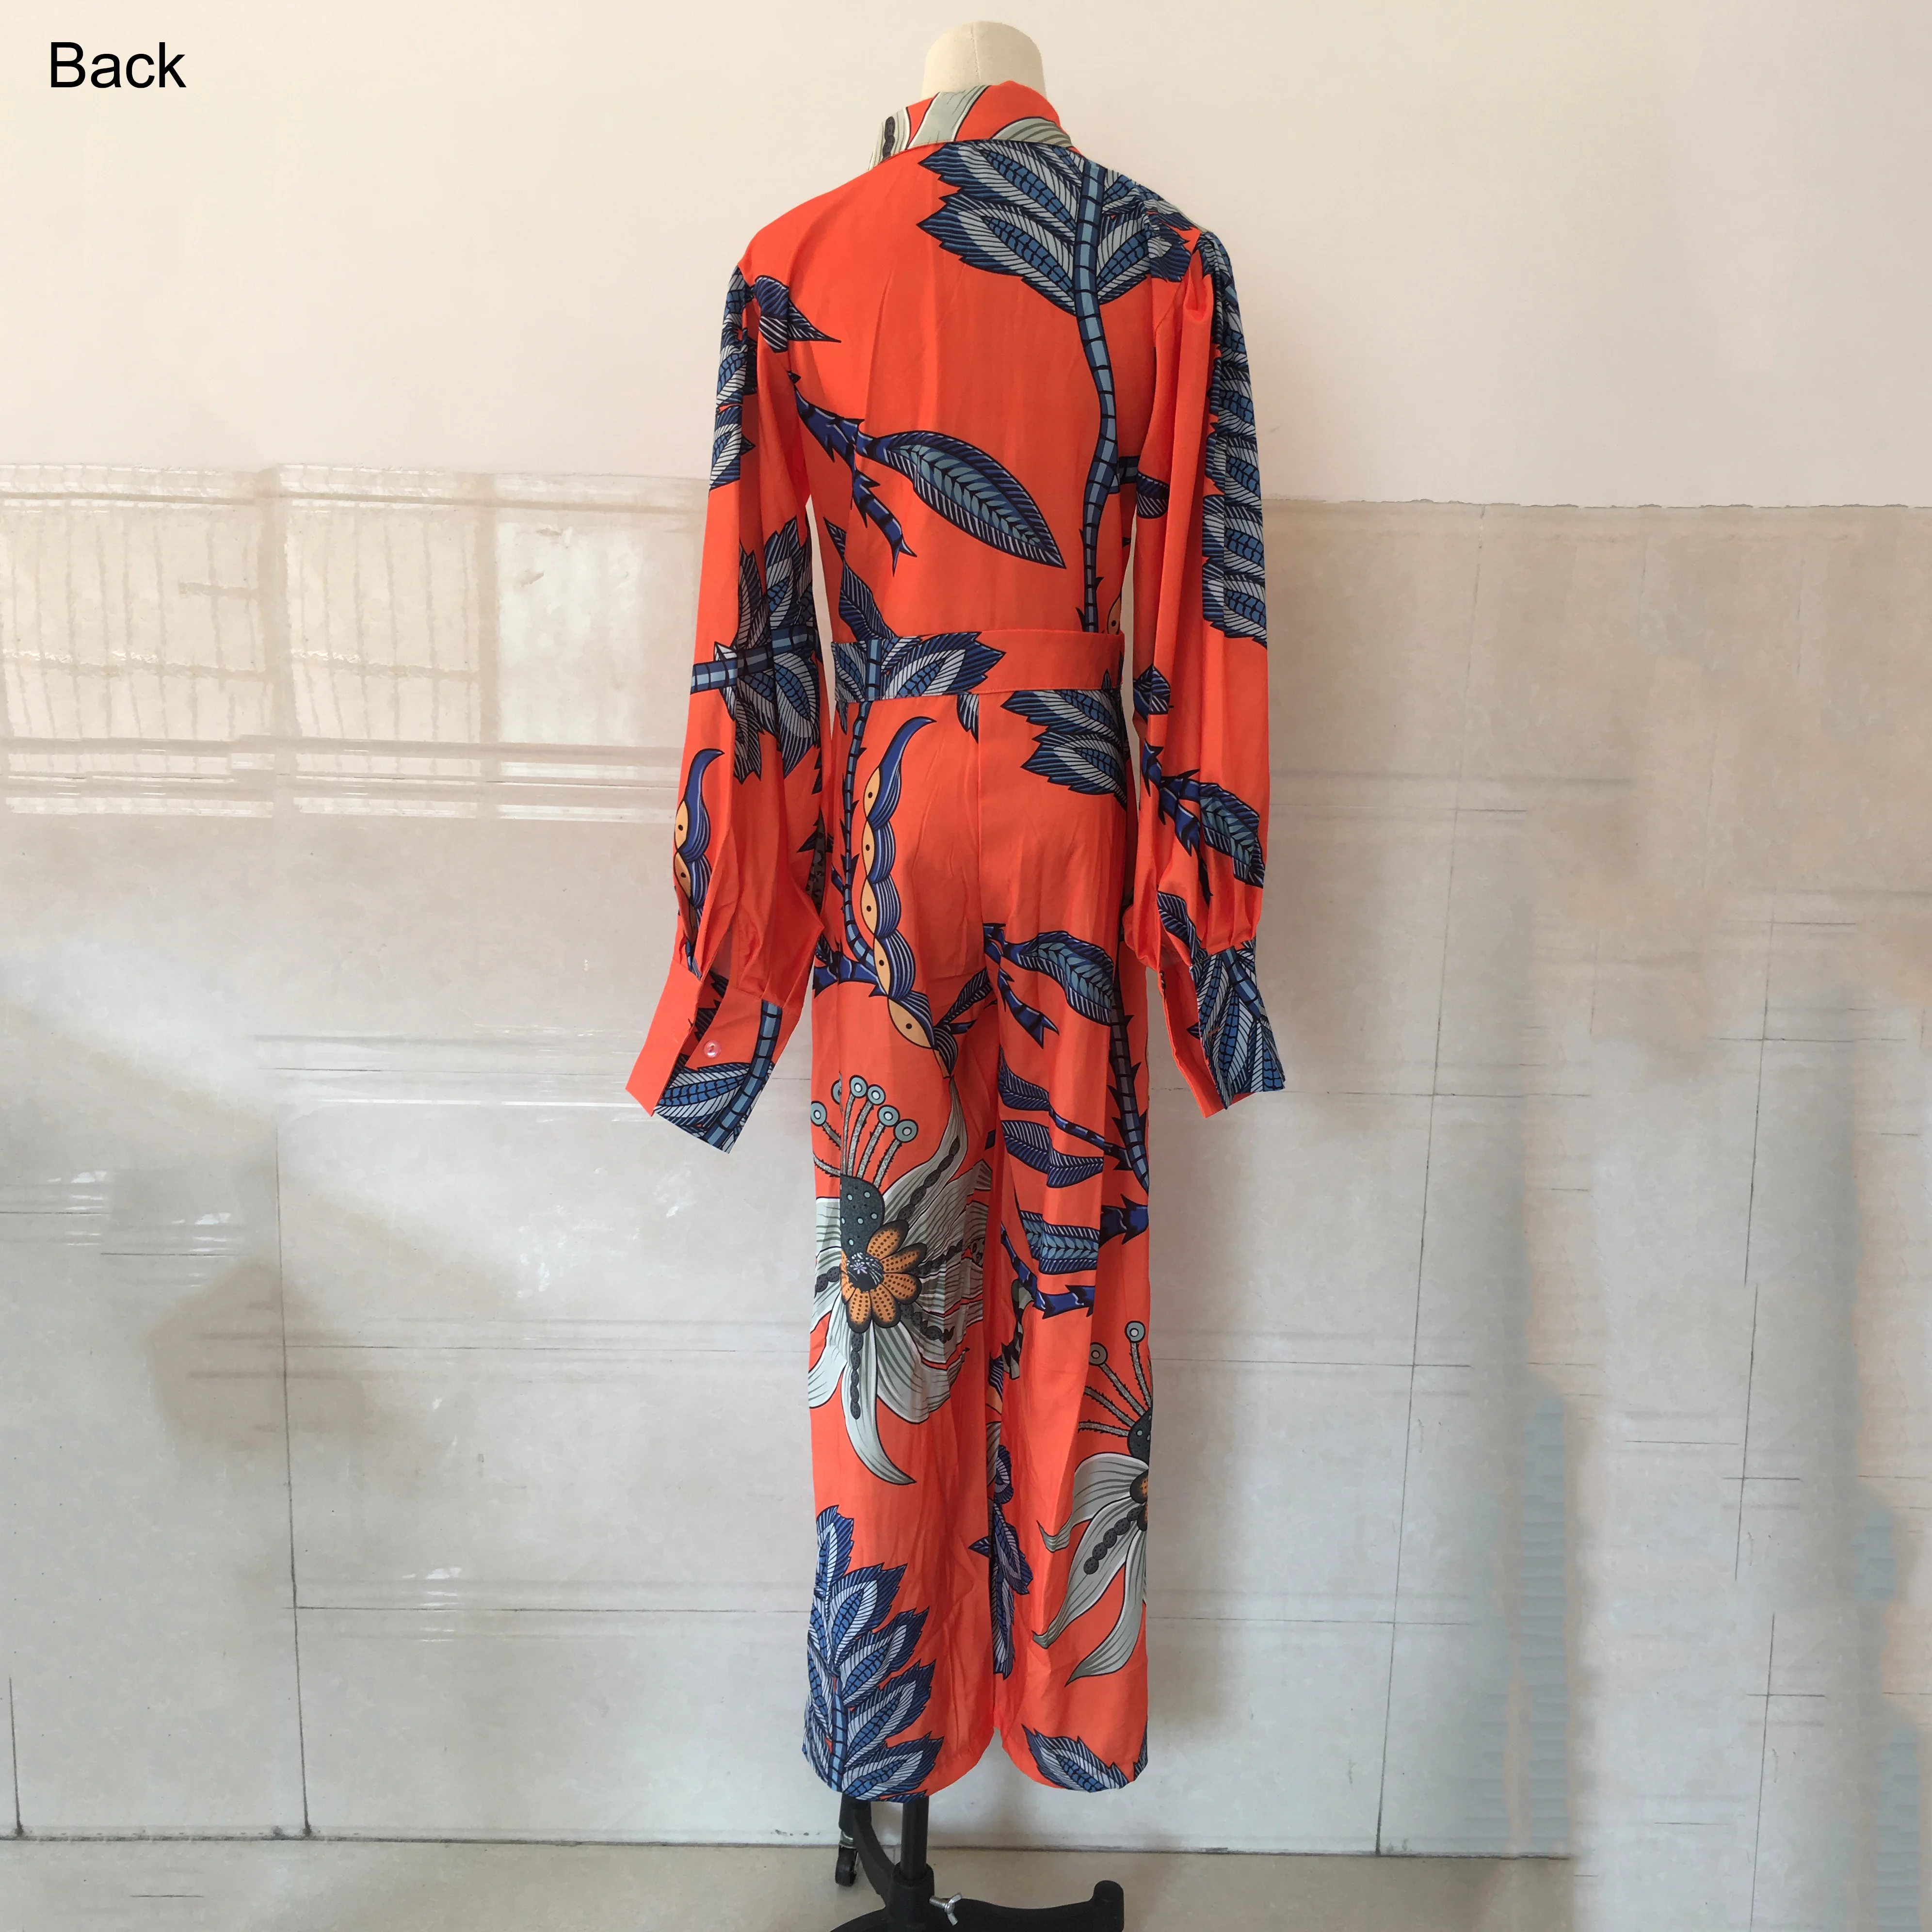 New Autumn Jumpsuits for Women's Orange Printed High Waisted Lantern Sleeve Fashion Elegant High Street Wear Long Rompers Cloth 4